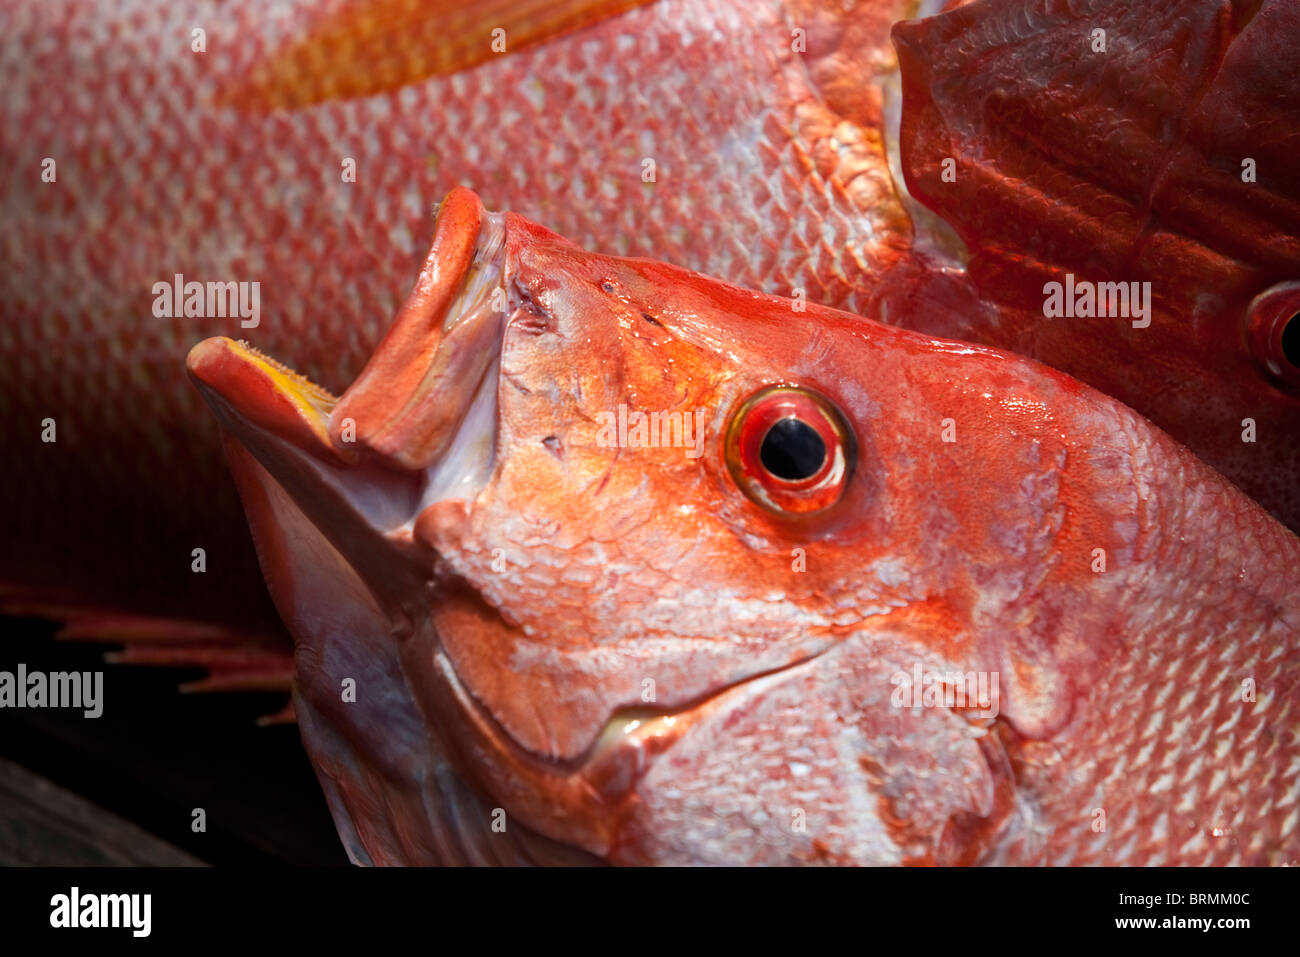 Close-up of a freshly caught fish Stock Photo